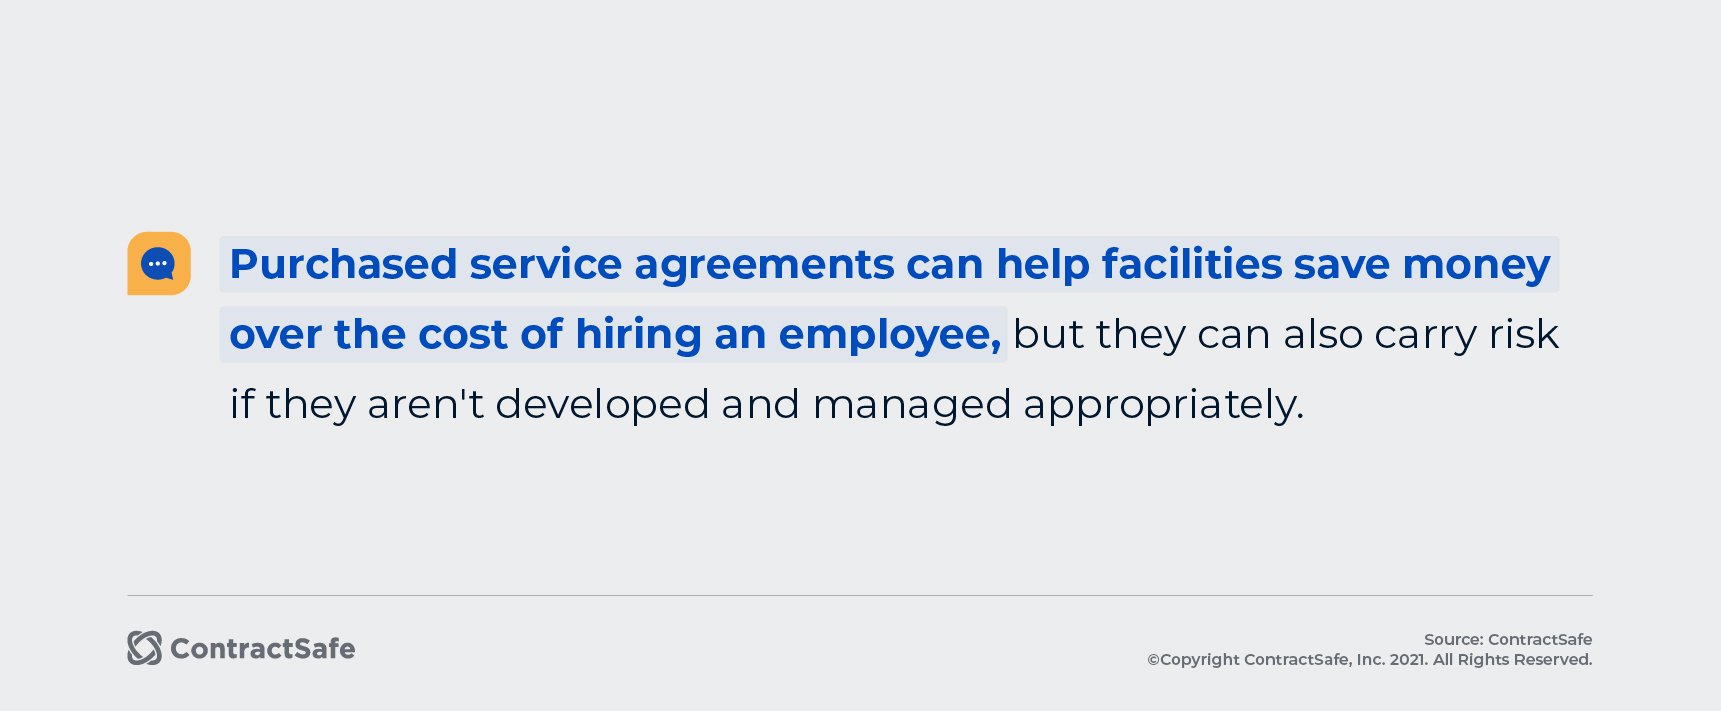 Purchased service agreements can help facilities save money over  the cost of hiring an employee, but they can also carry risk if they aren't developed and managed appropriately. 